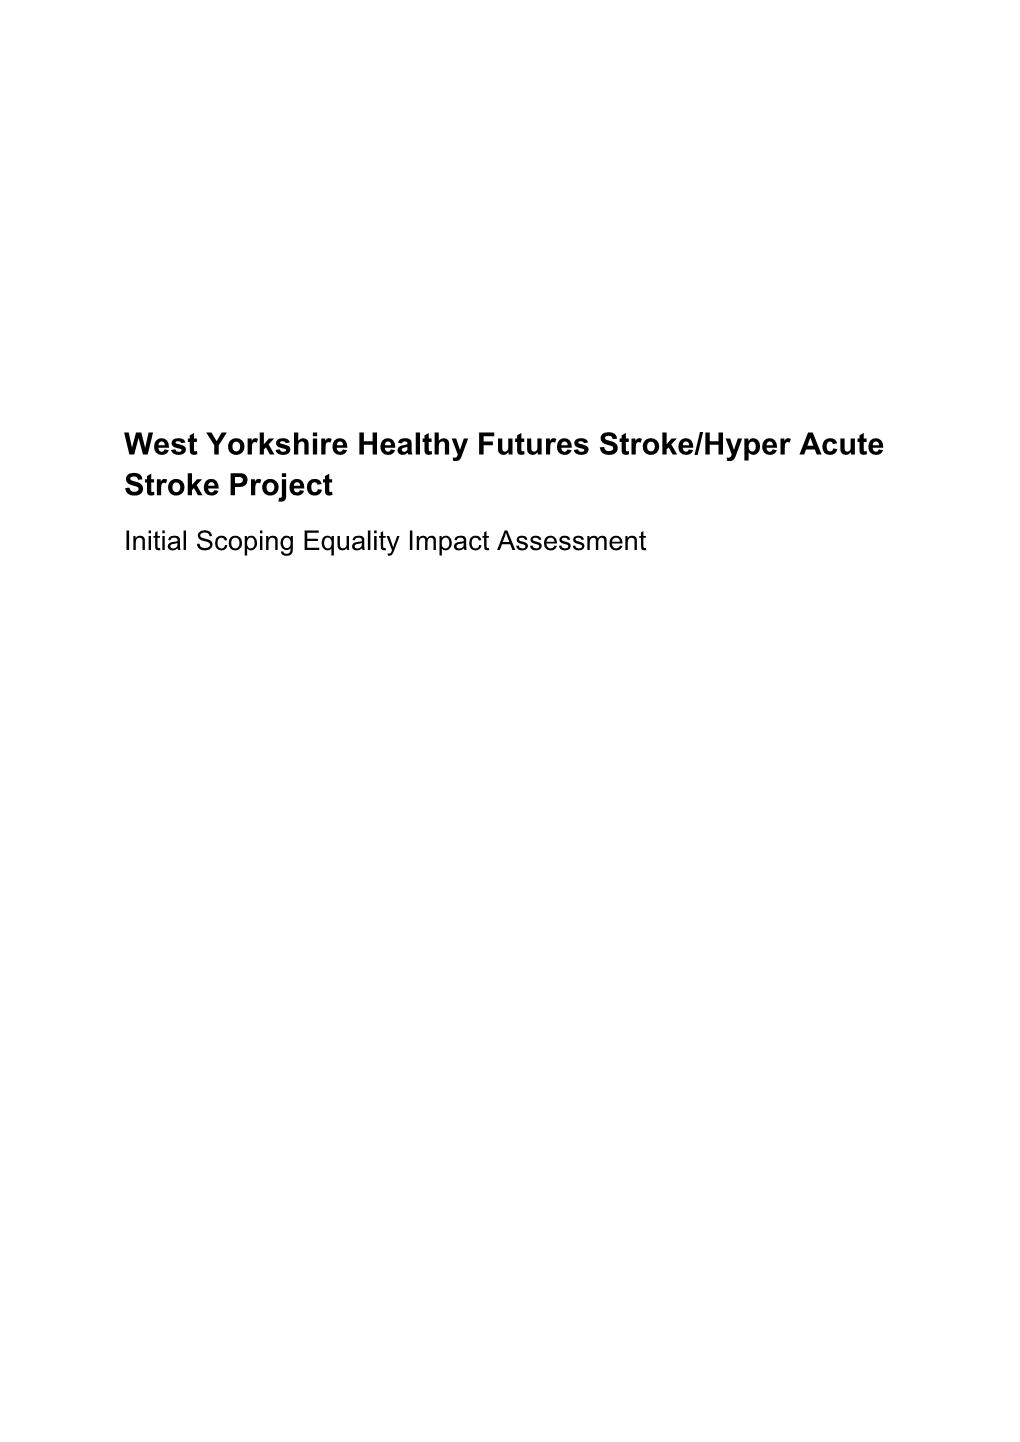 West Yorkshire Healthy Futures Stroke/Hyper Acute Stroke Project Initial Scoping Equality Impact Assessment